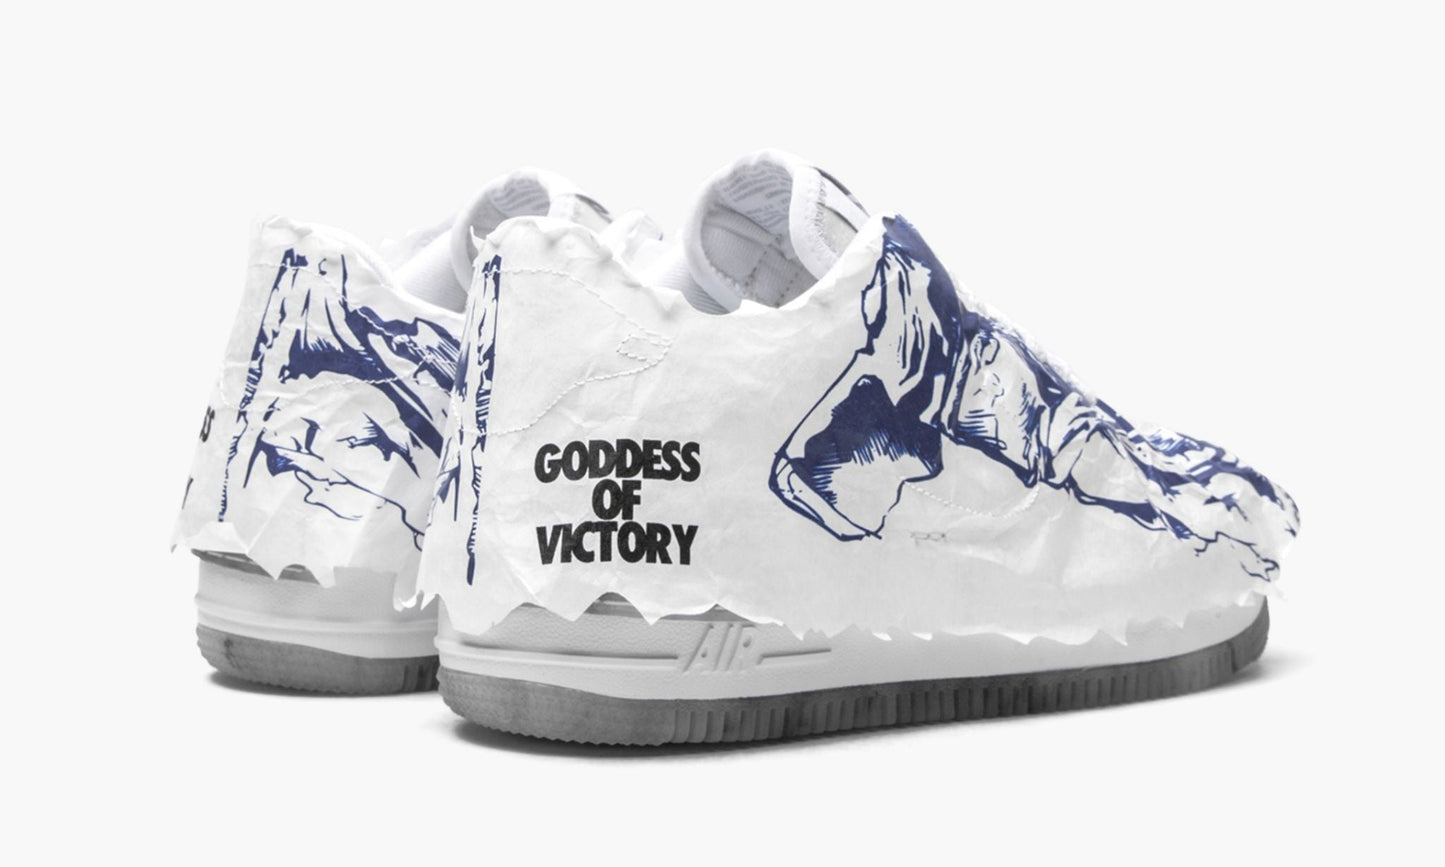 WMNS Air Force 1 Low Shadow "Goddess of Victory"